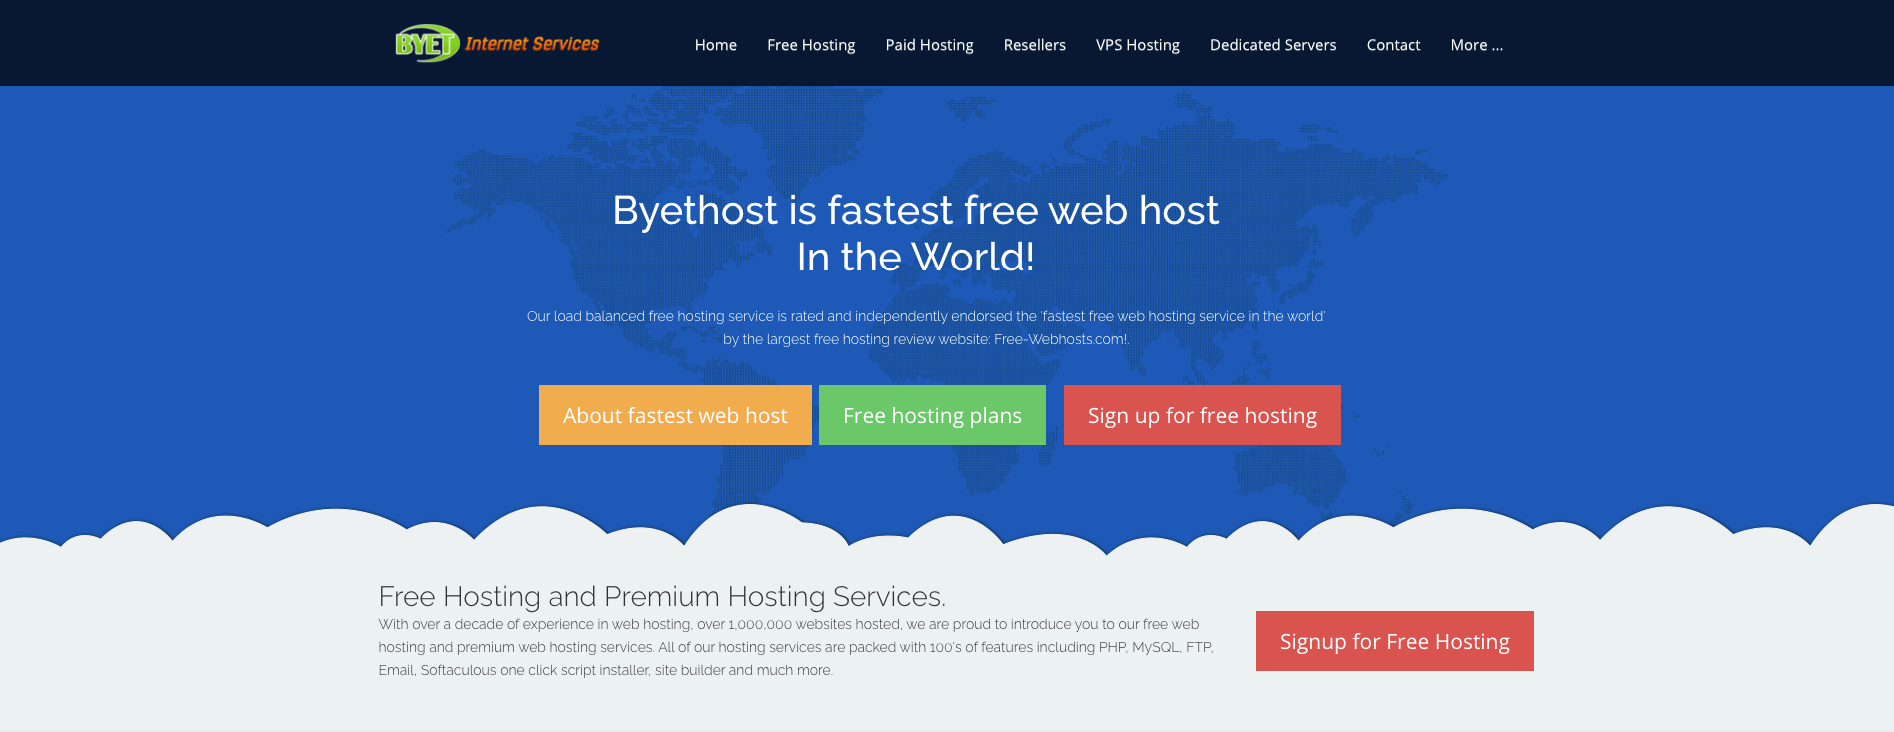 ByetHost offers free web hosting.